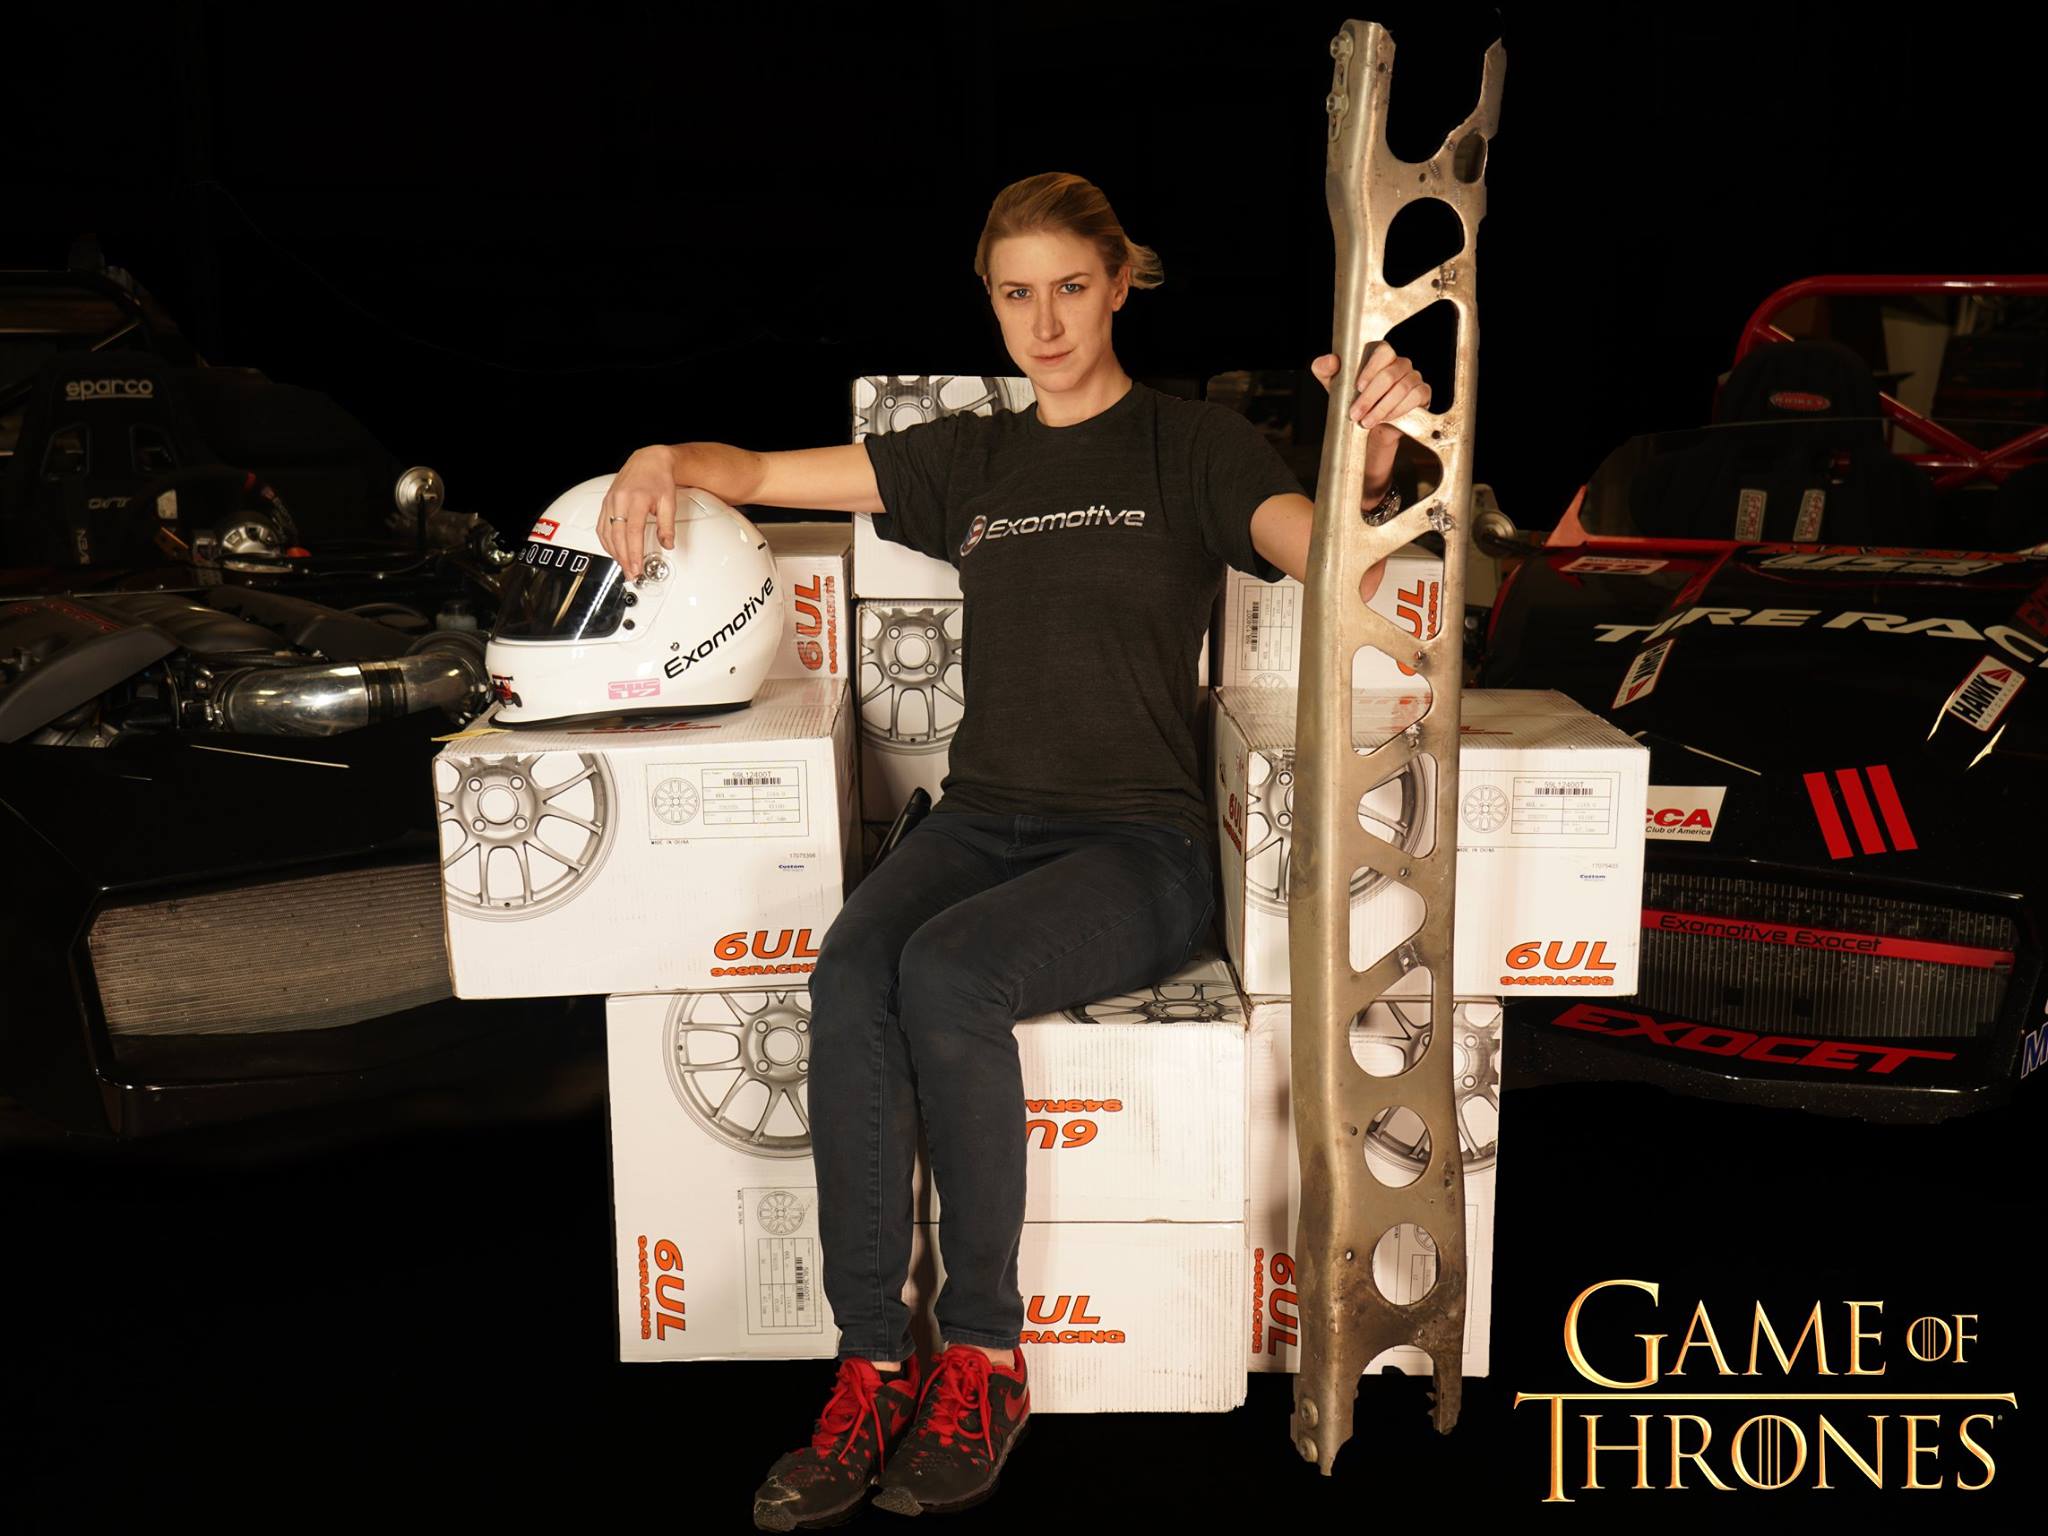 The aluminum throne is much lighter than the iron throne